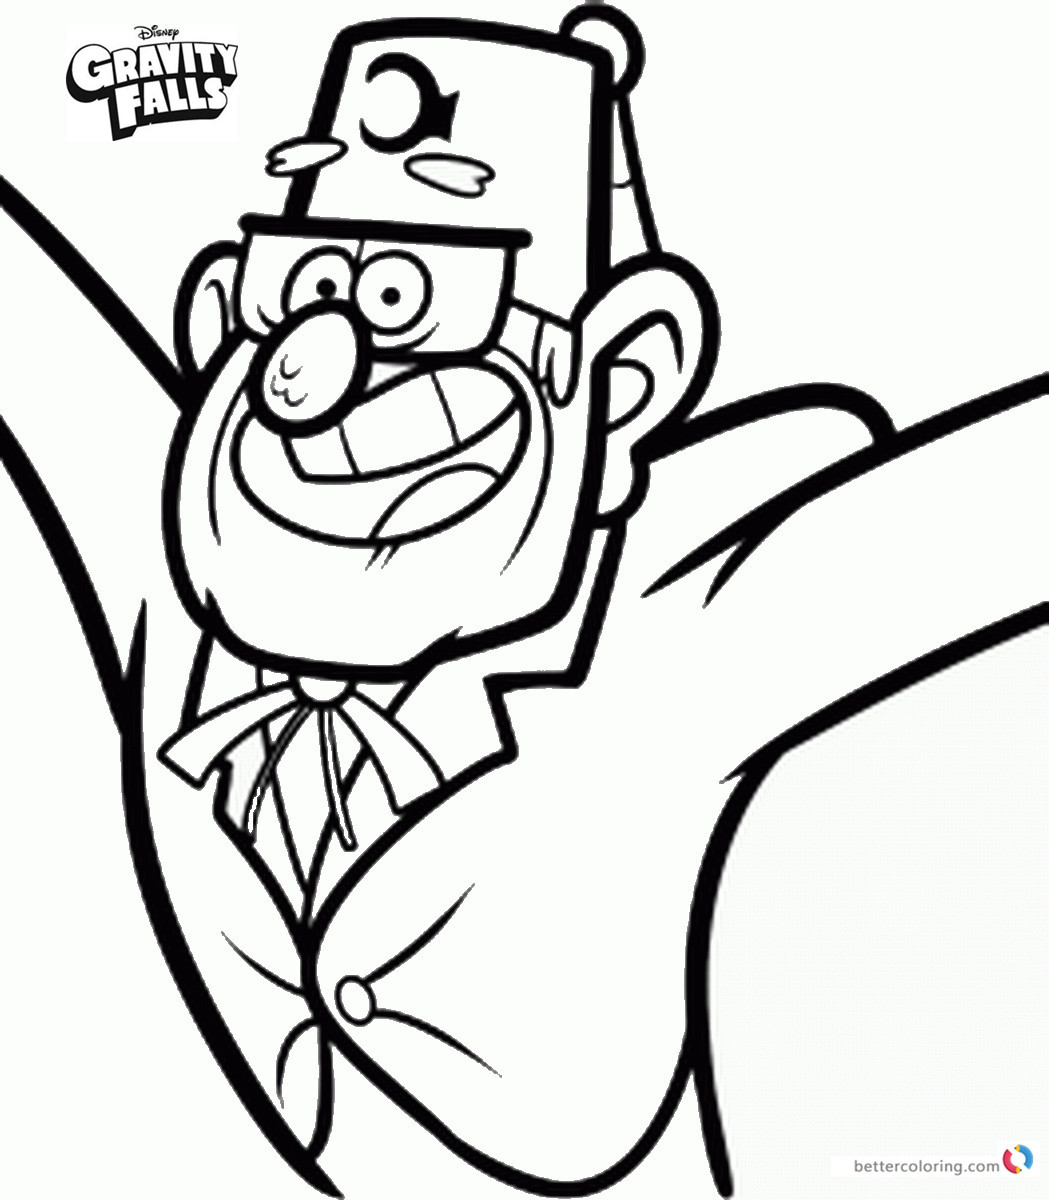 Gravity Falls coloring pages Uncle Stan - Free Printable Coloring Pages